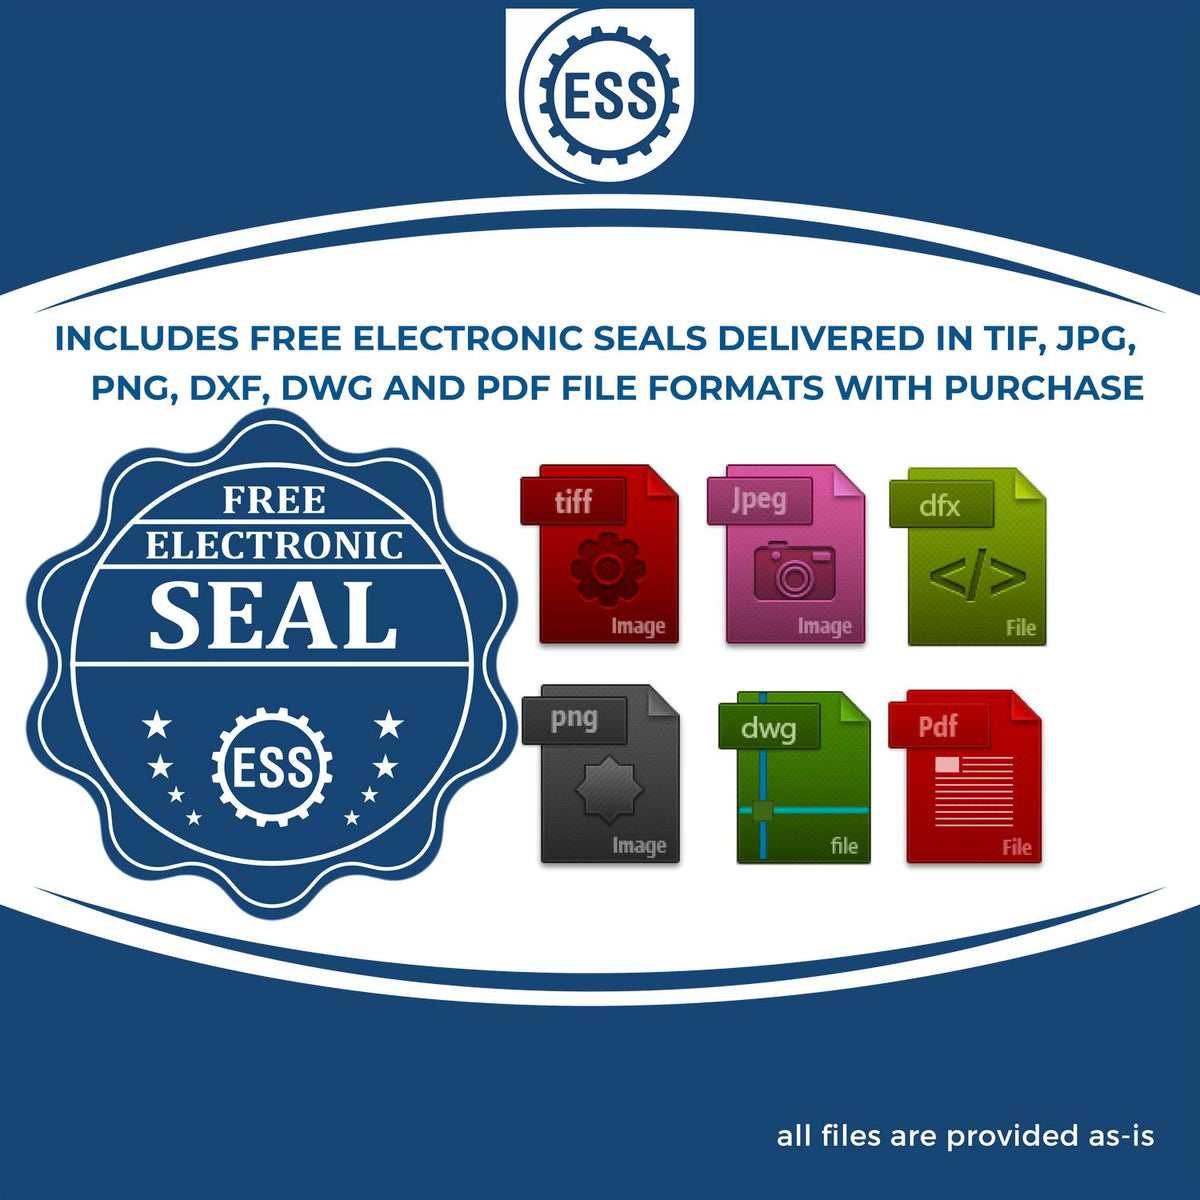 An infographic for the free electronic seal for the Long Reach North Carolina PE Seal illustrating the different file type icons such as DXF, DWG, TIF, JPG and PNG.